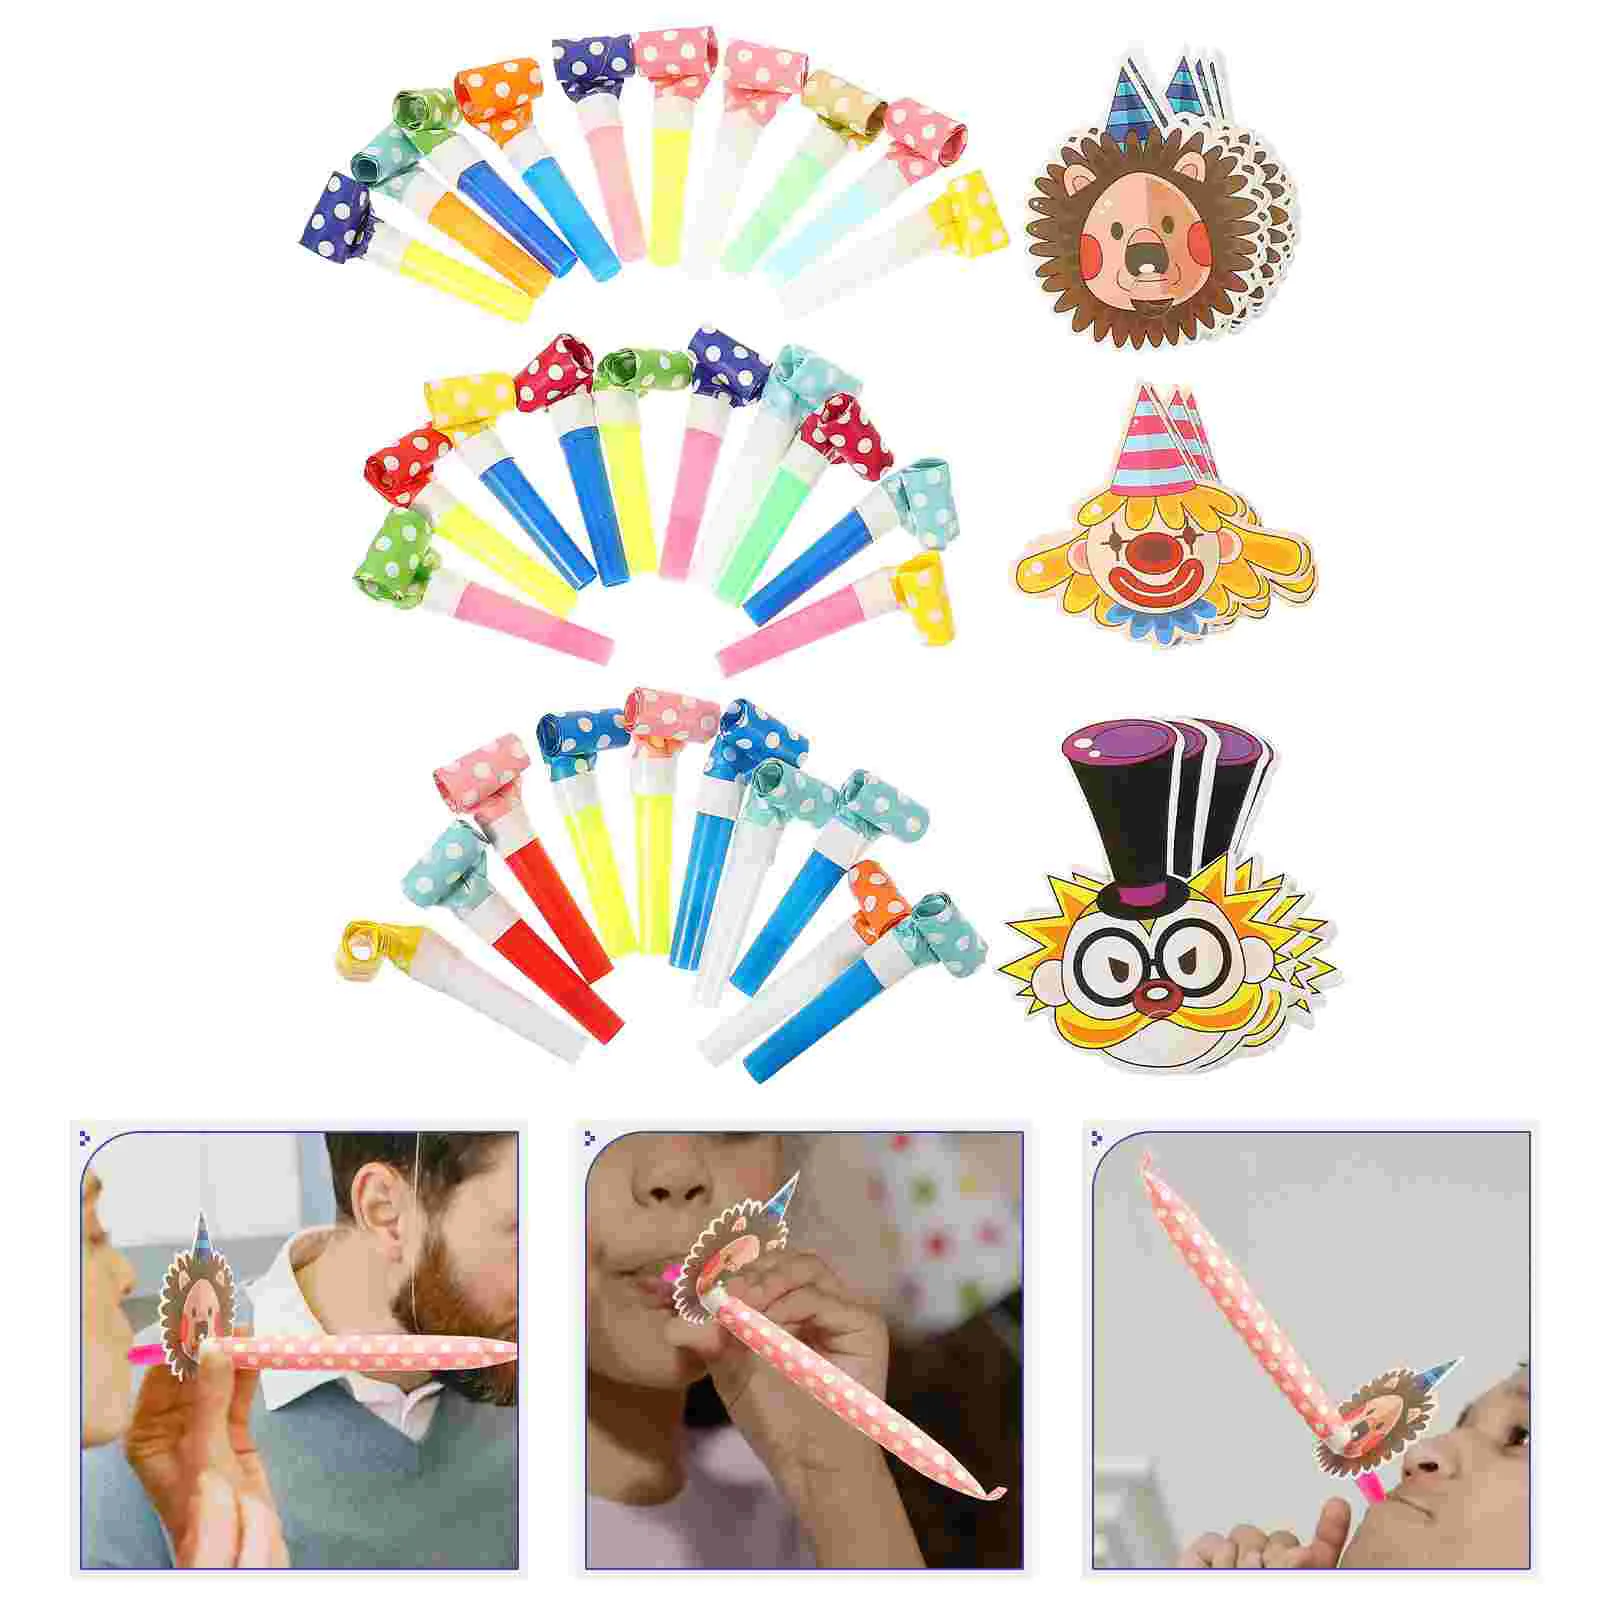 

30 Pcs Cartoon Blowing Dragon Party Noisemakers Kids Kidcraft Playset Blowers Birthday Blowouts Horns Whistles Toys Funny